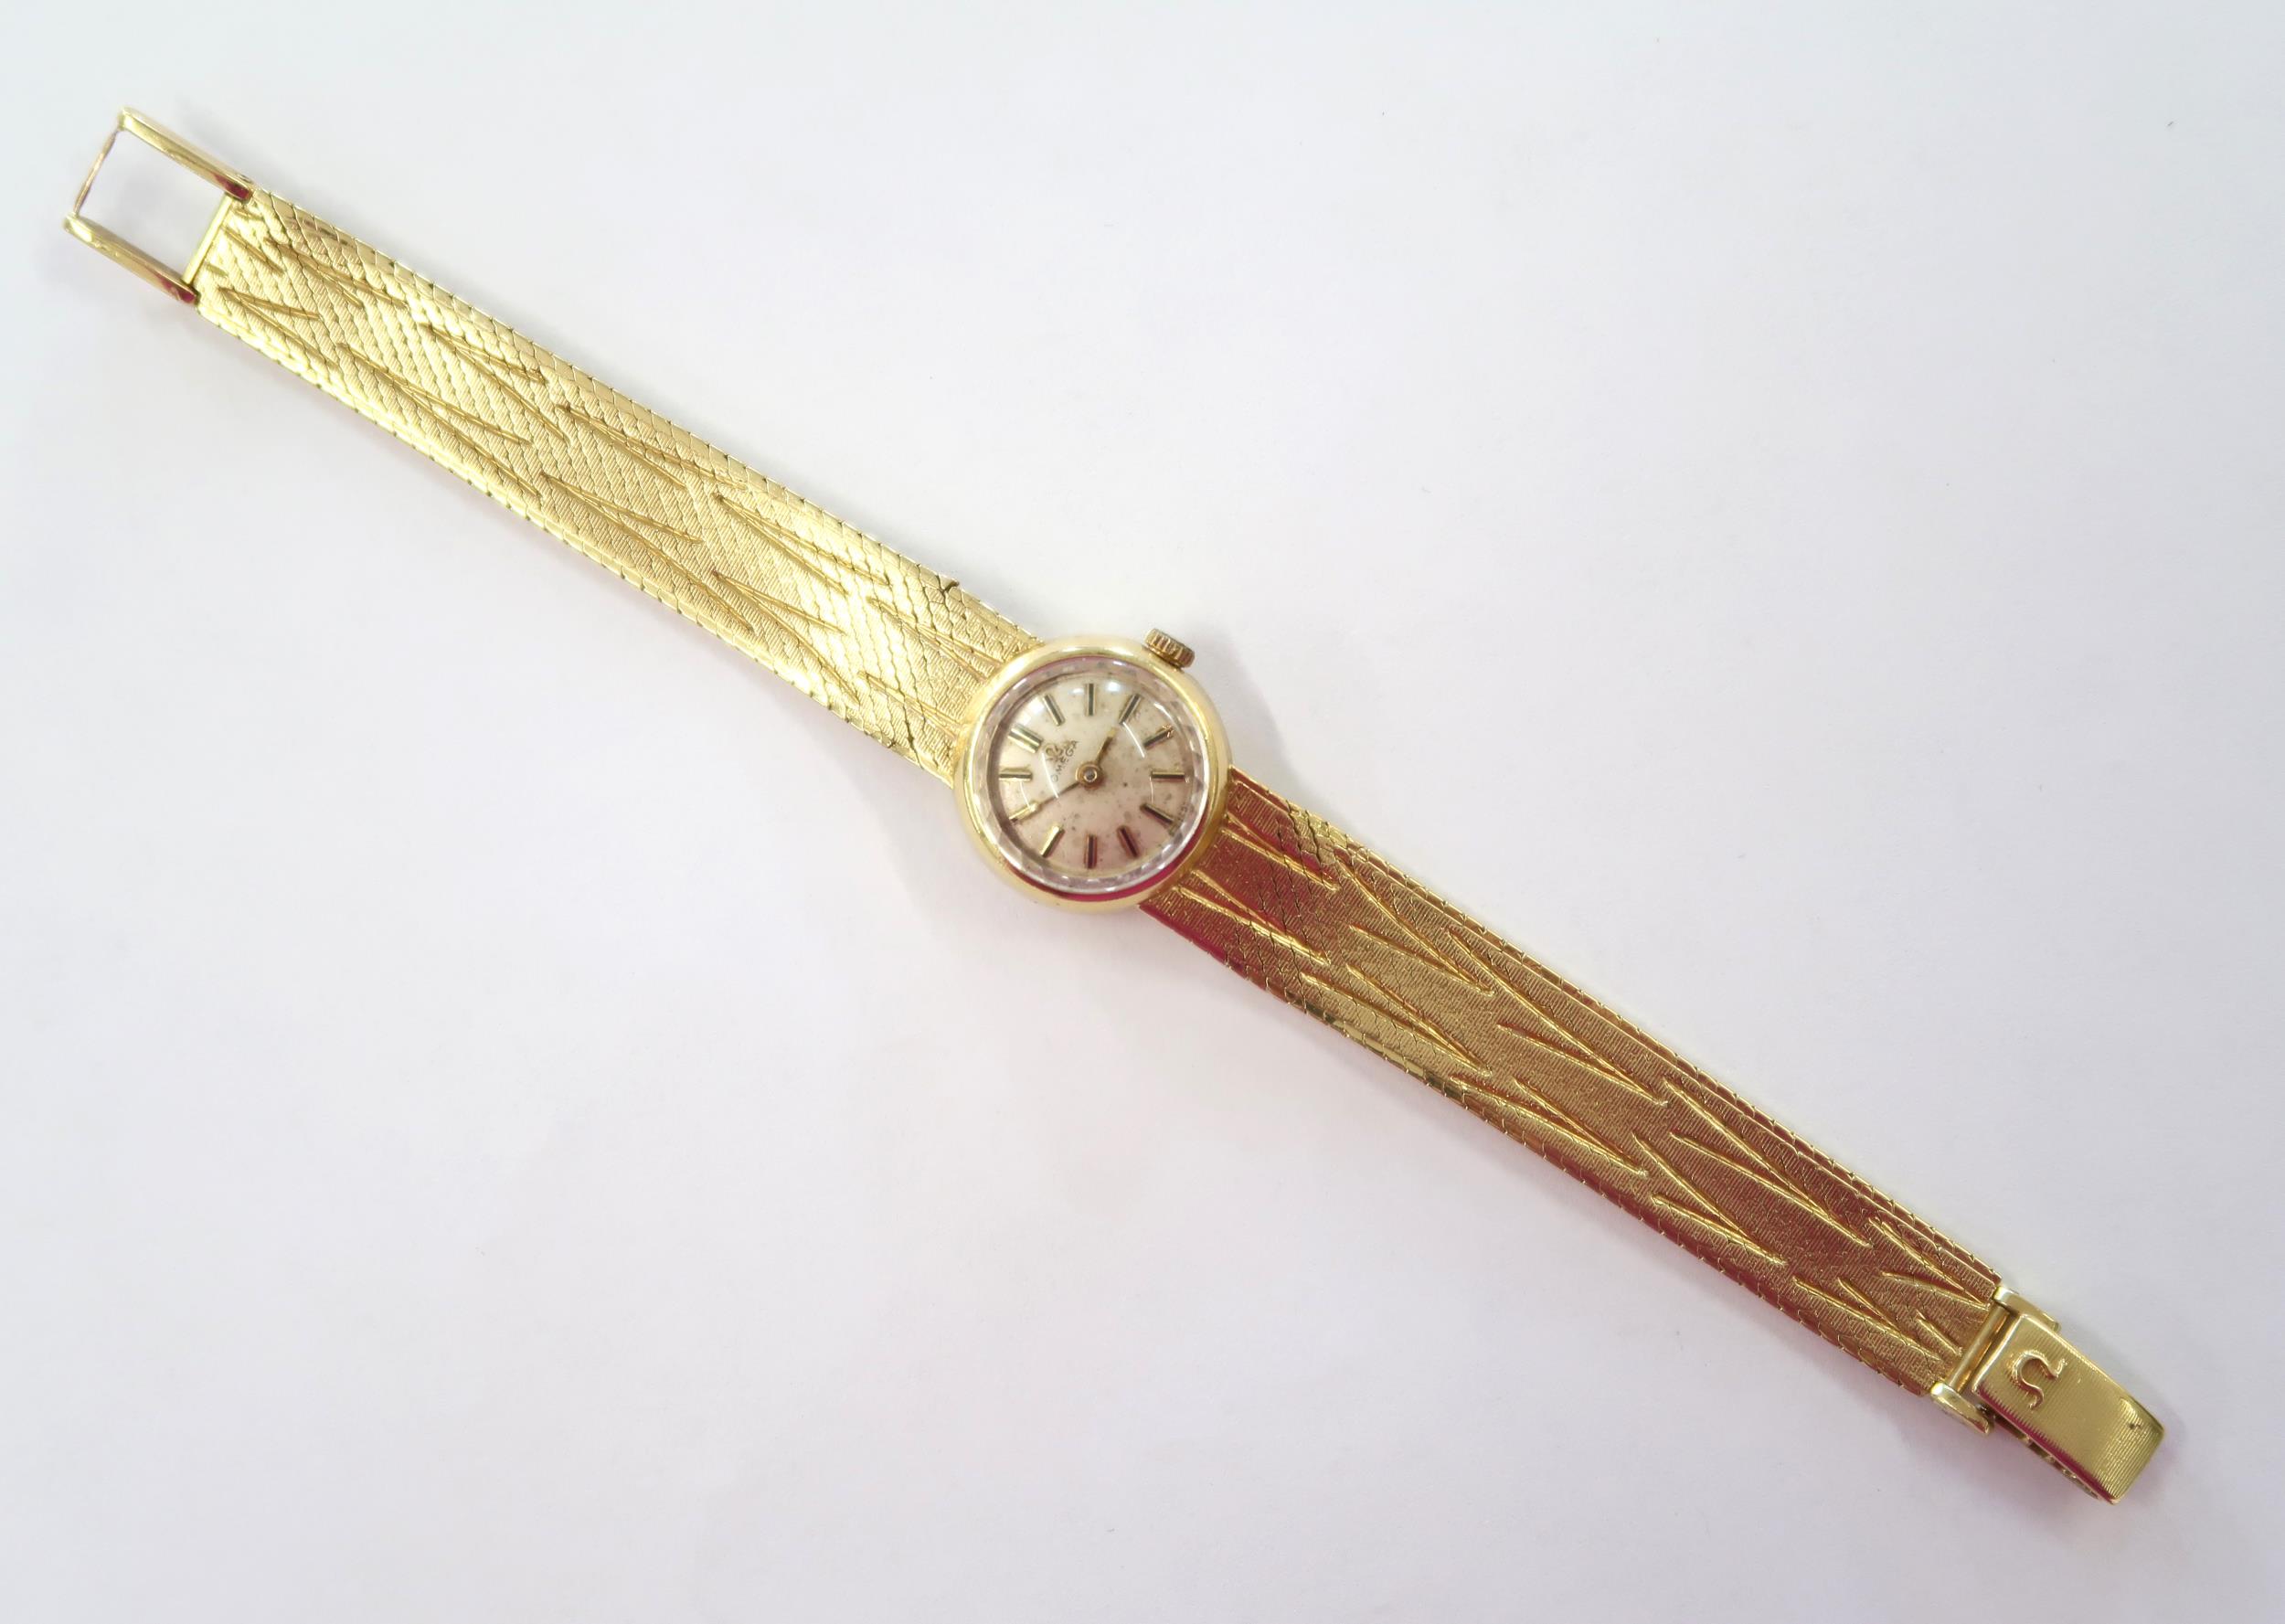 A ladies Omega wristwatch with an 18ct gold strap - approx weight 37.9 grams - Image 2 of 4